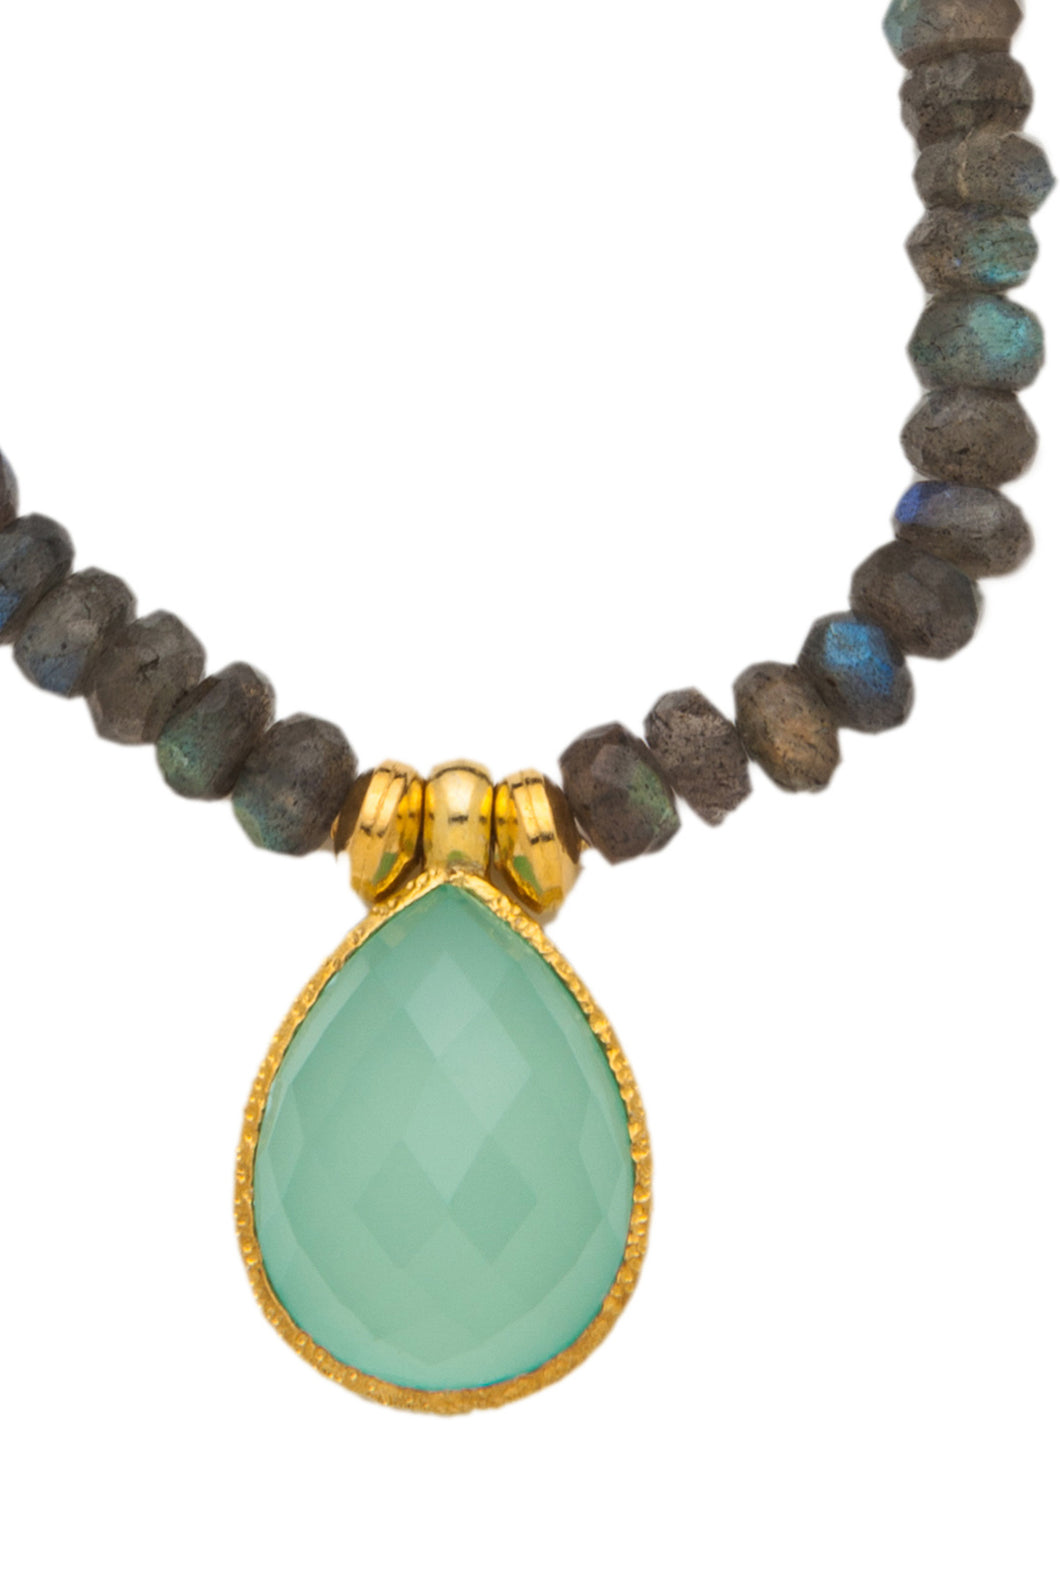 Labradorite Necklace with Chalcedony Pendant in 24kt gold vermeil NF002-LC